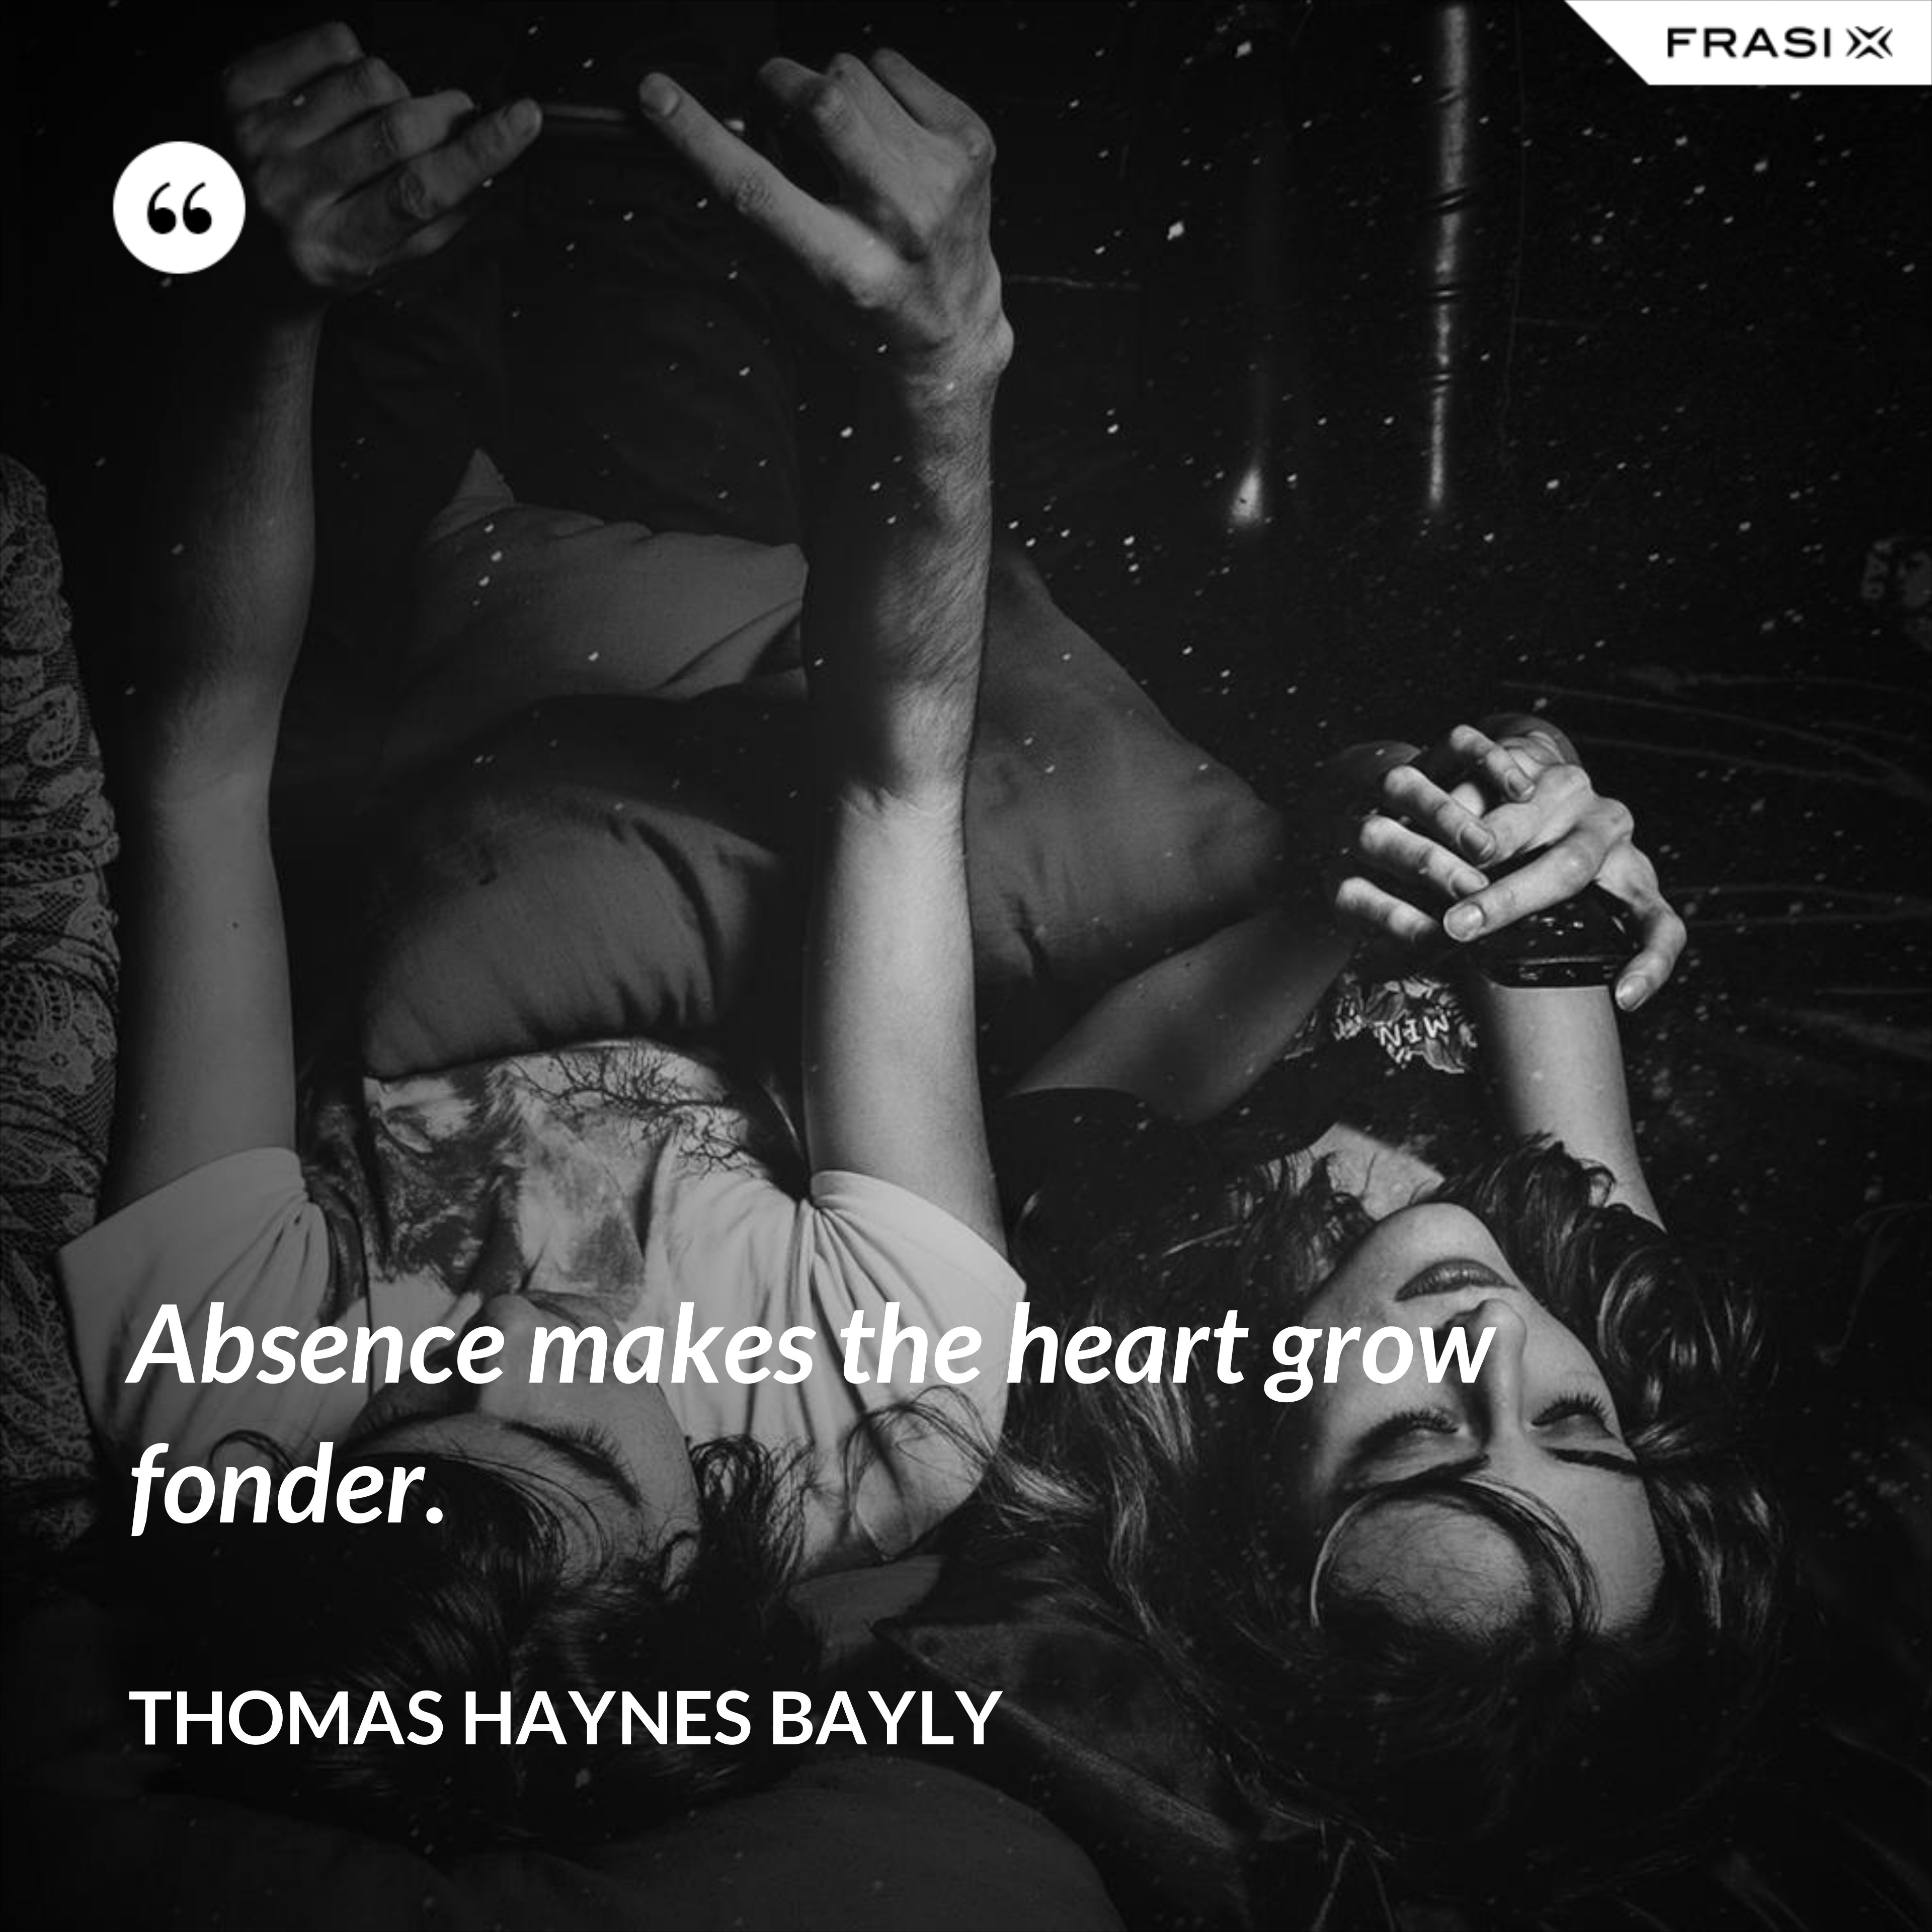 Absence makes the heart grow fonder. - Thomas Haynes Bayly